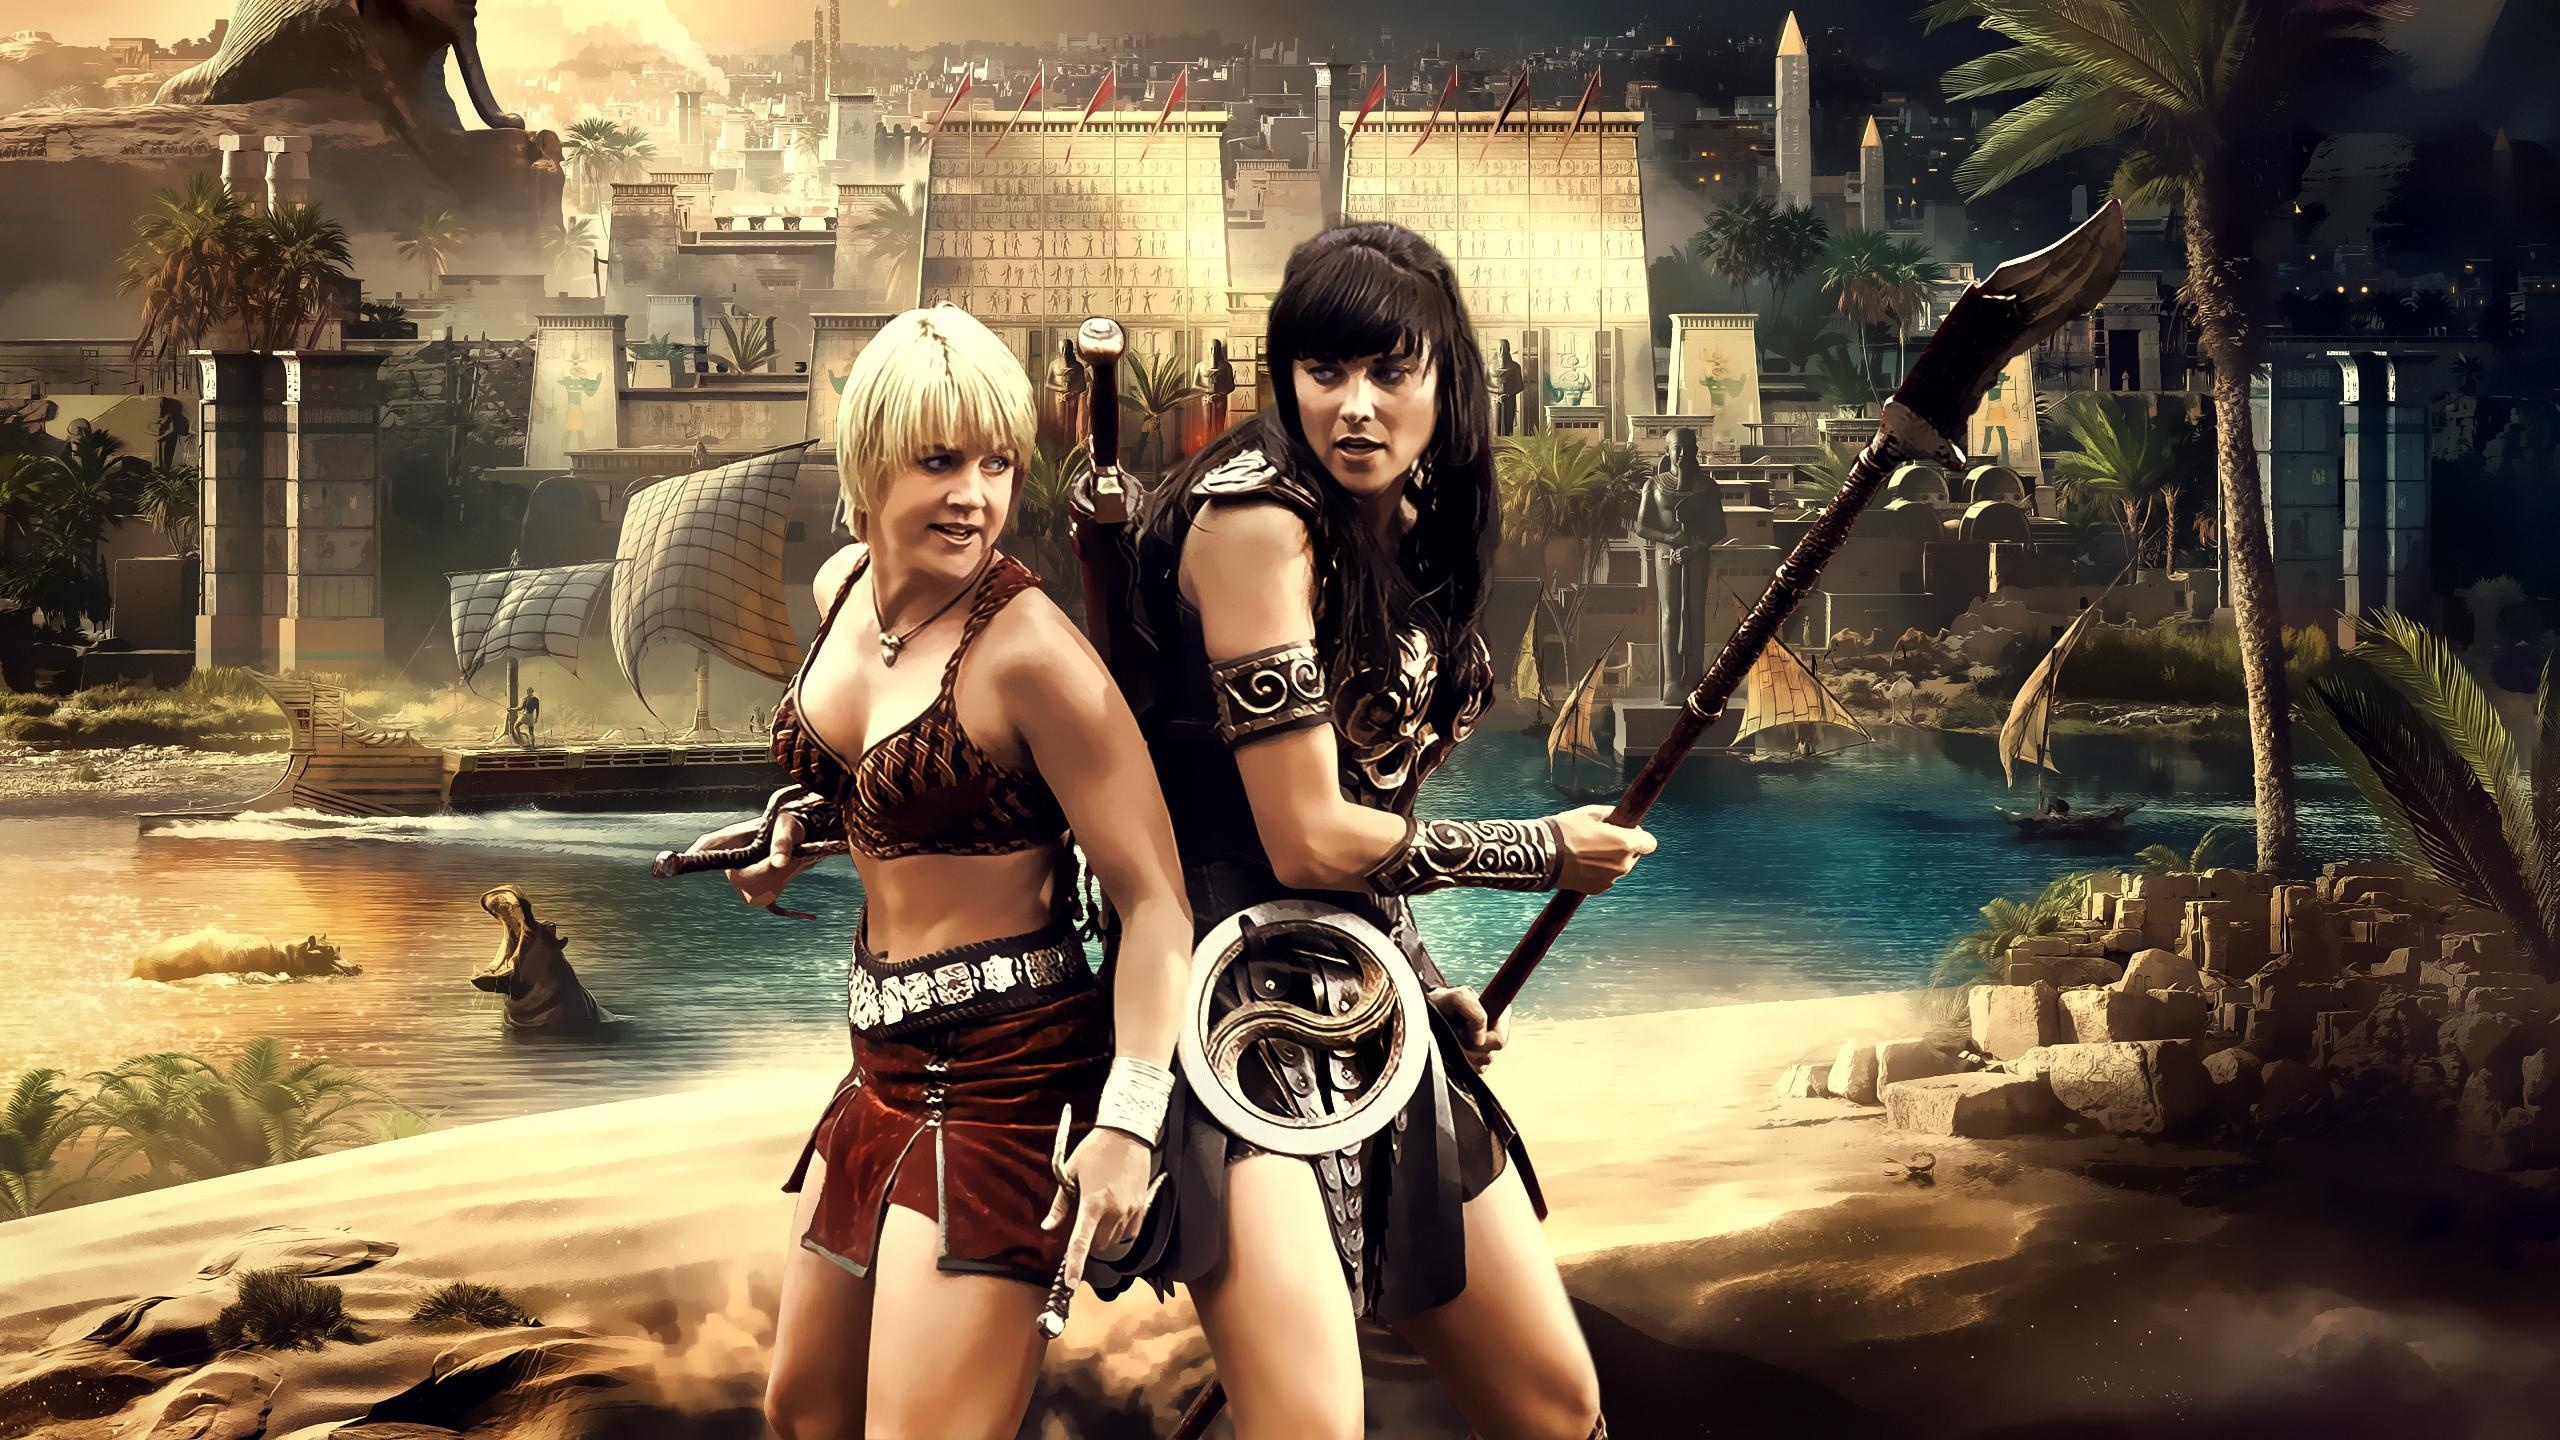 Xena: Warrior Princess (TV Series): Gabrielle, Renee O'Connor, Lucy Lawless, A moral guide, companion, and soulmate. 2560x1440 HD Wallpaper.